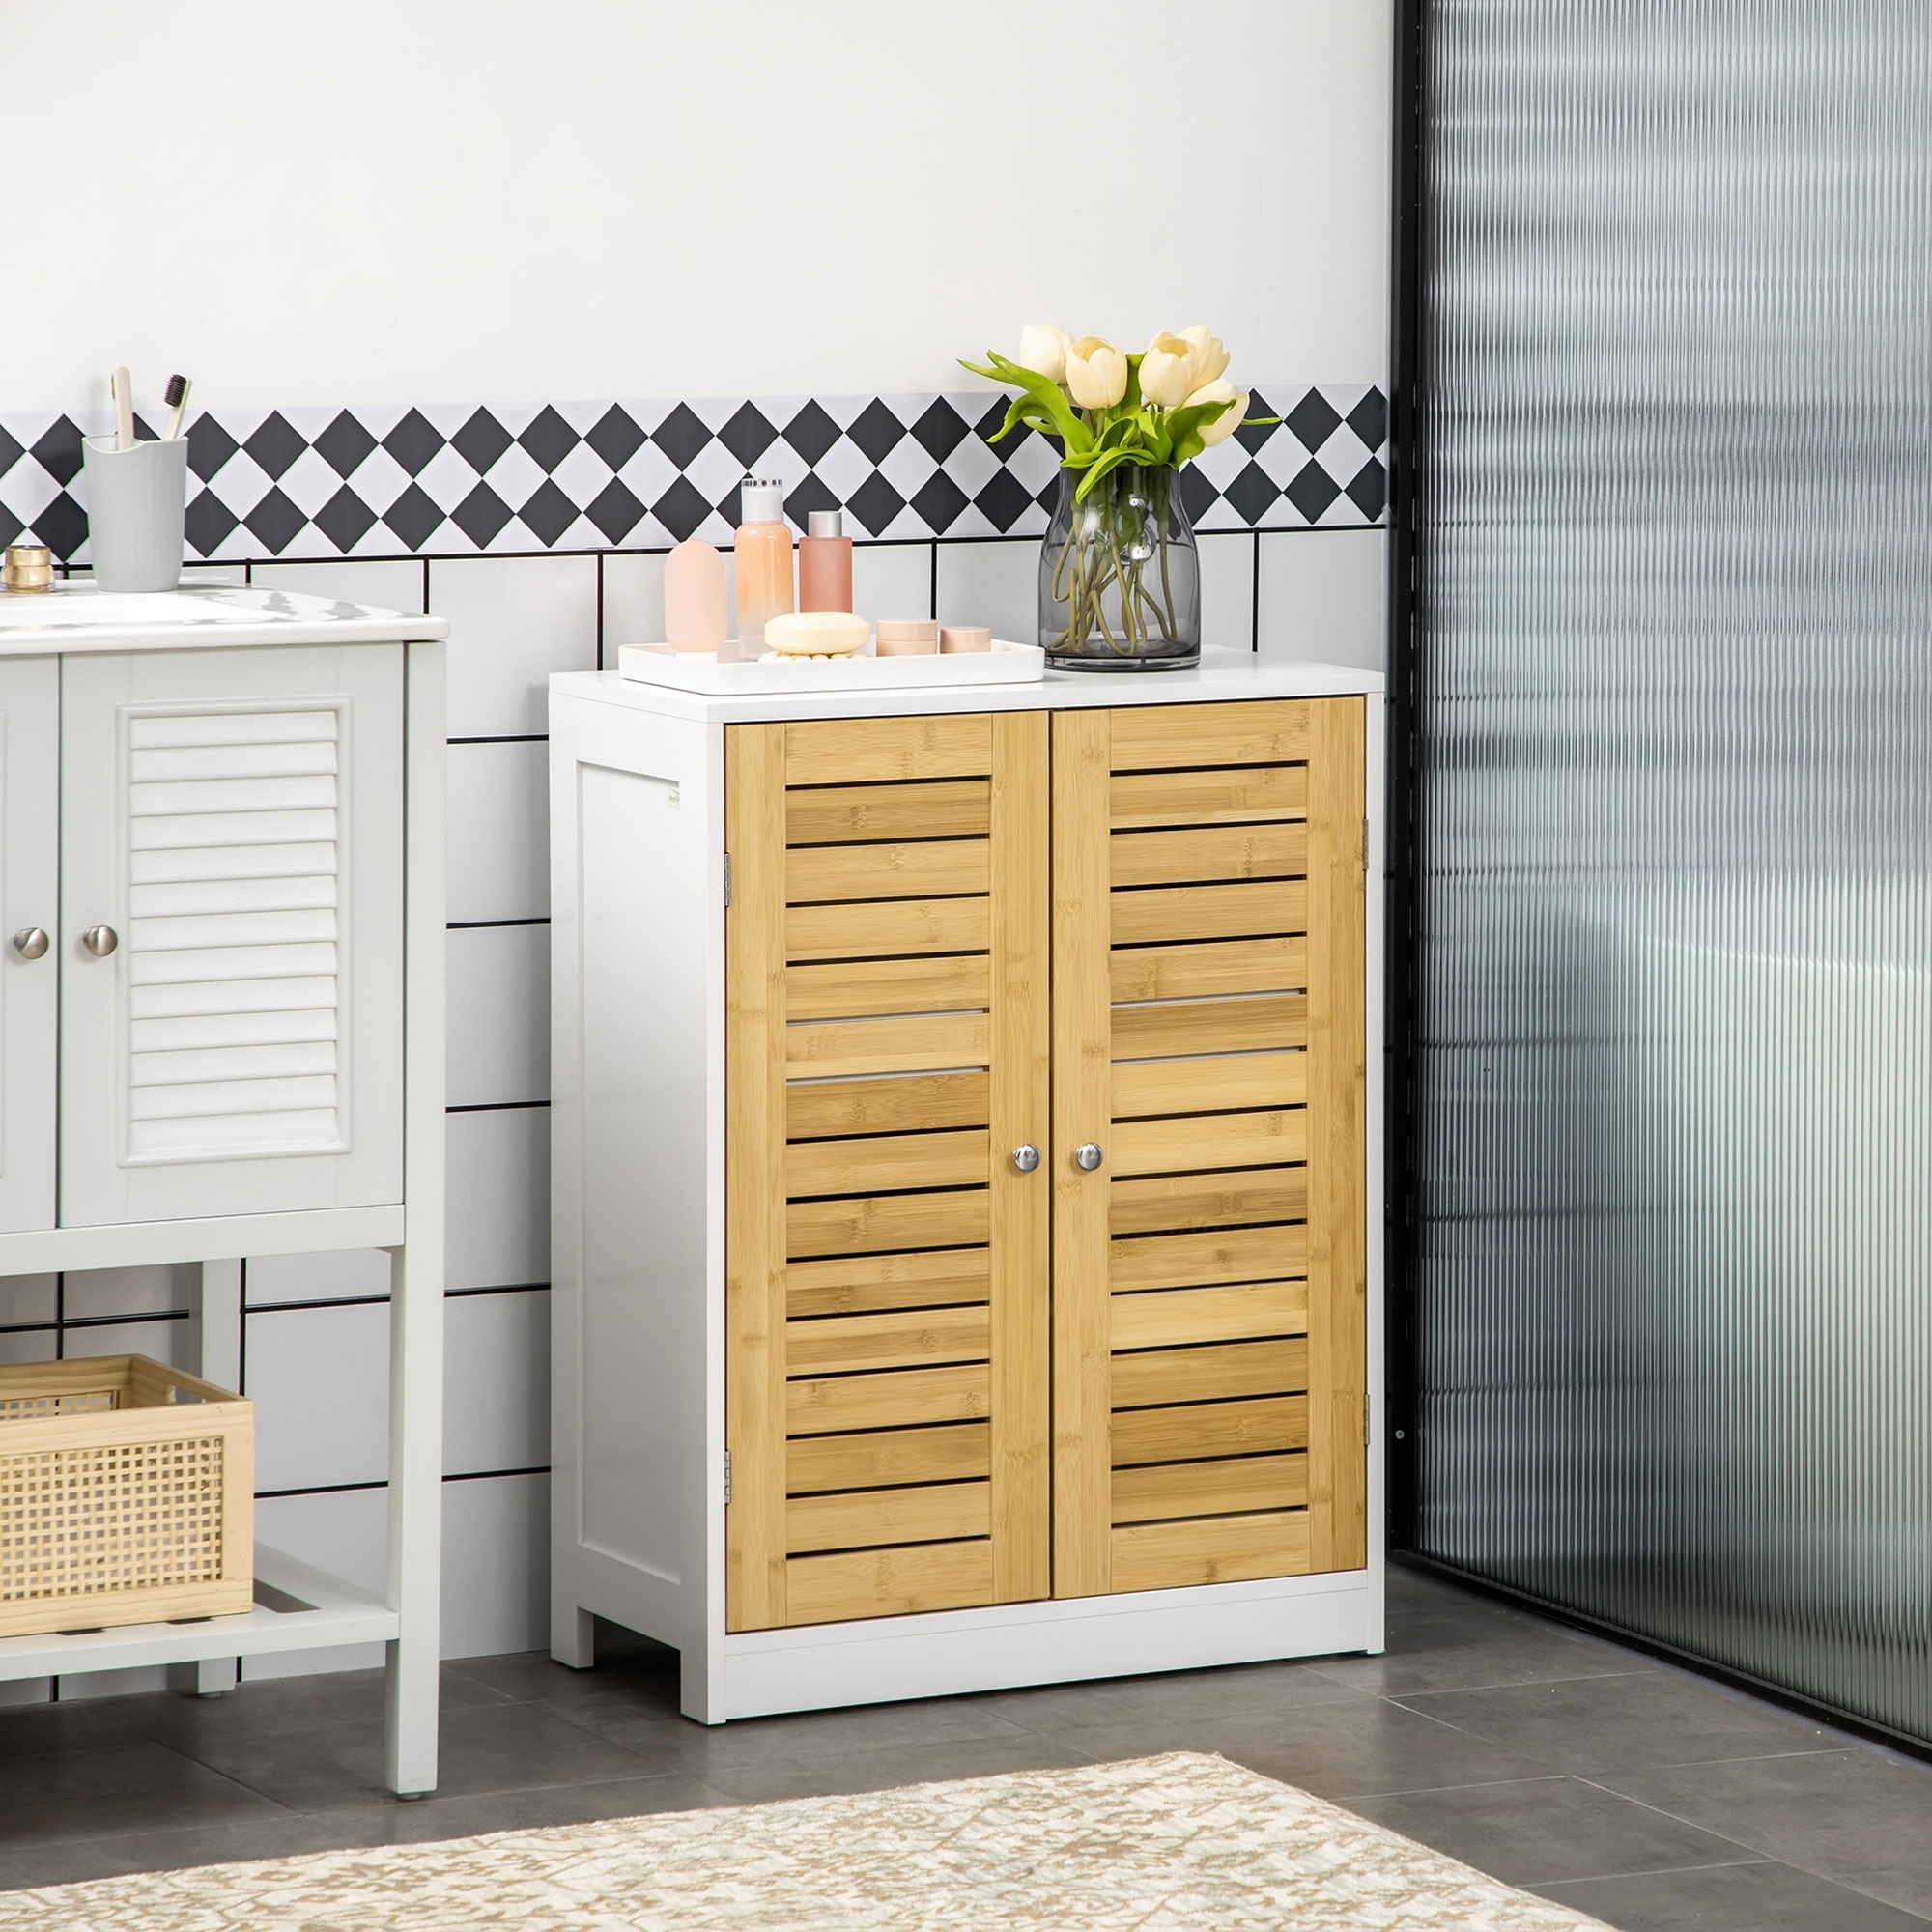 https://ak1.ostkcdn.com/images/products/is/images/direct/07c88907d8e7cf2867fcdf5a83b7115944f3d5e0/kleankin-Bathroom-Floor-Cabinet%2C-Side-Storage-Organizer-Cabinet-with-Bamboo-Doors%2C-Adjustable-Shelves%2C-White-and-Natural.jpg